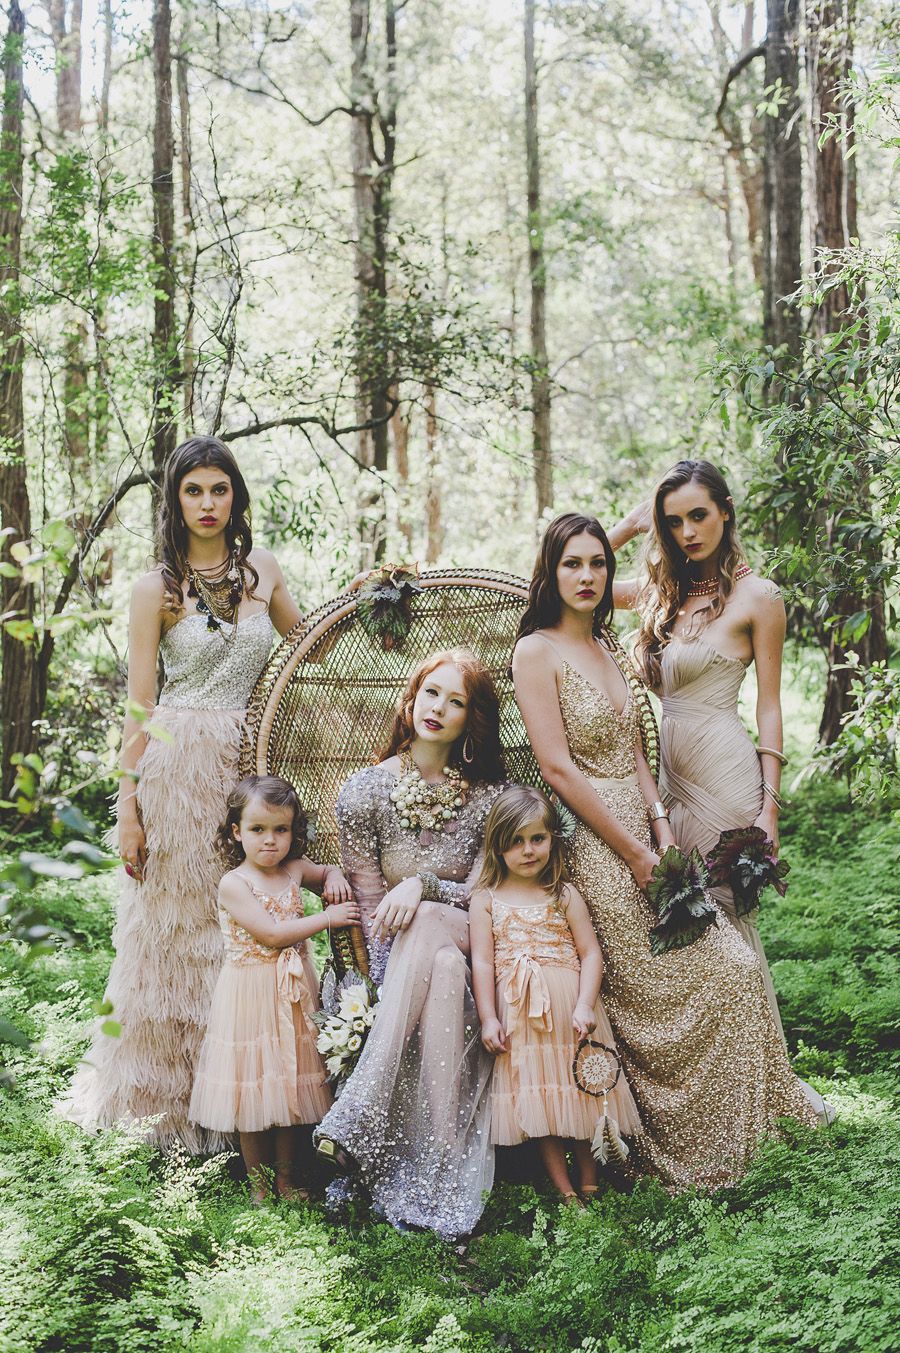 Bohemian Wedding. The girl on the far right has a fantastic glamour pose.